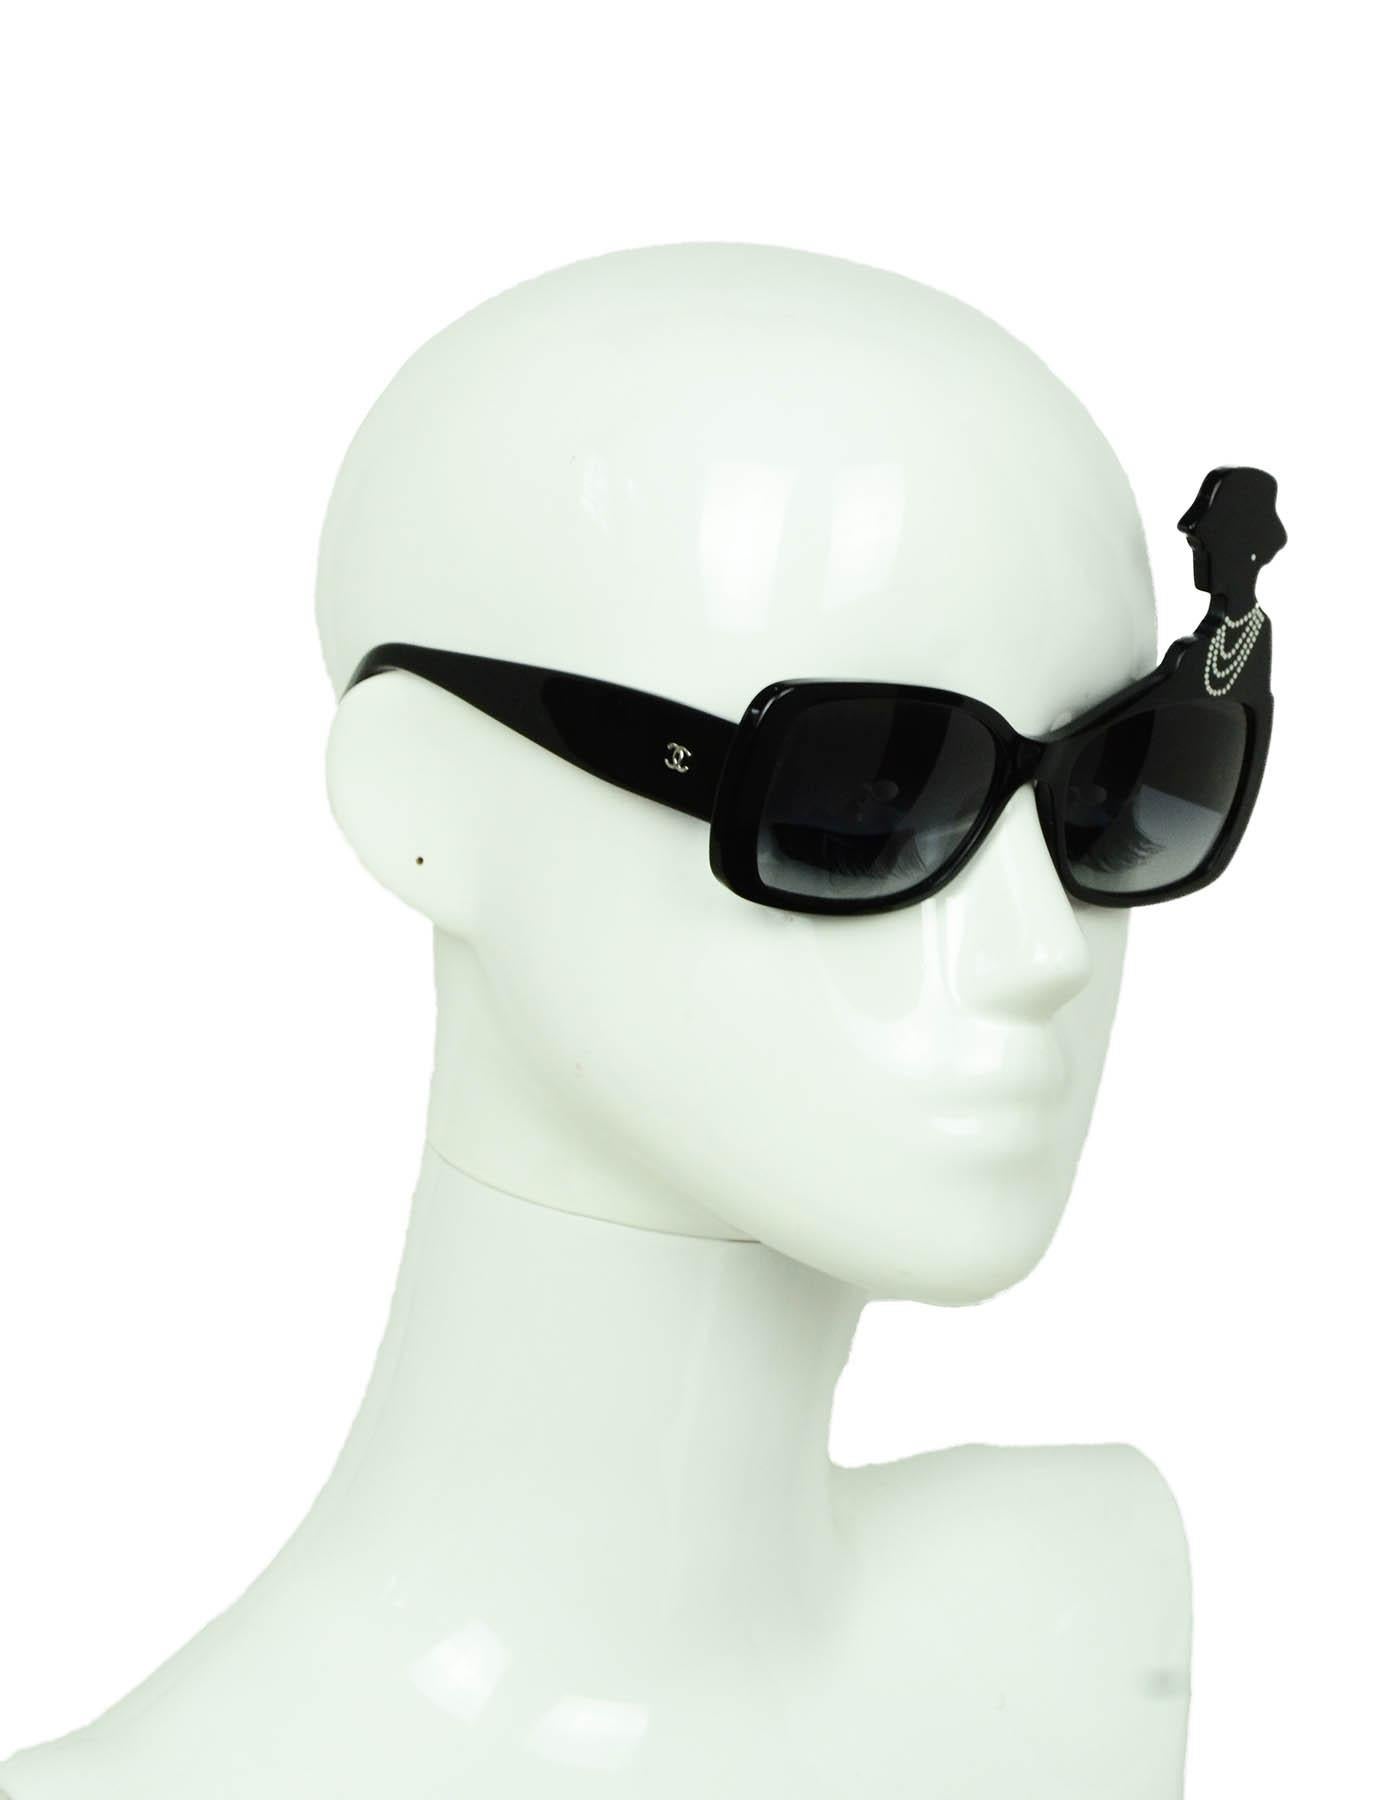 Chanel Black Acetate Coco Silhouette Sunglasses

Made In: Italy
Color: Black
Hardware: Silvertone
Materials: Resin
Overall Condition: Excellent
Includes: Box, pouch

Measurements:
Length Across Front: 5.75”
Height: 1.75”/ 3.5